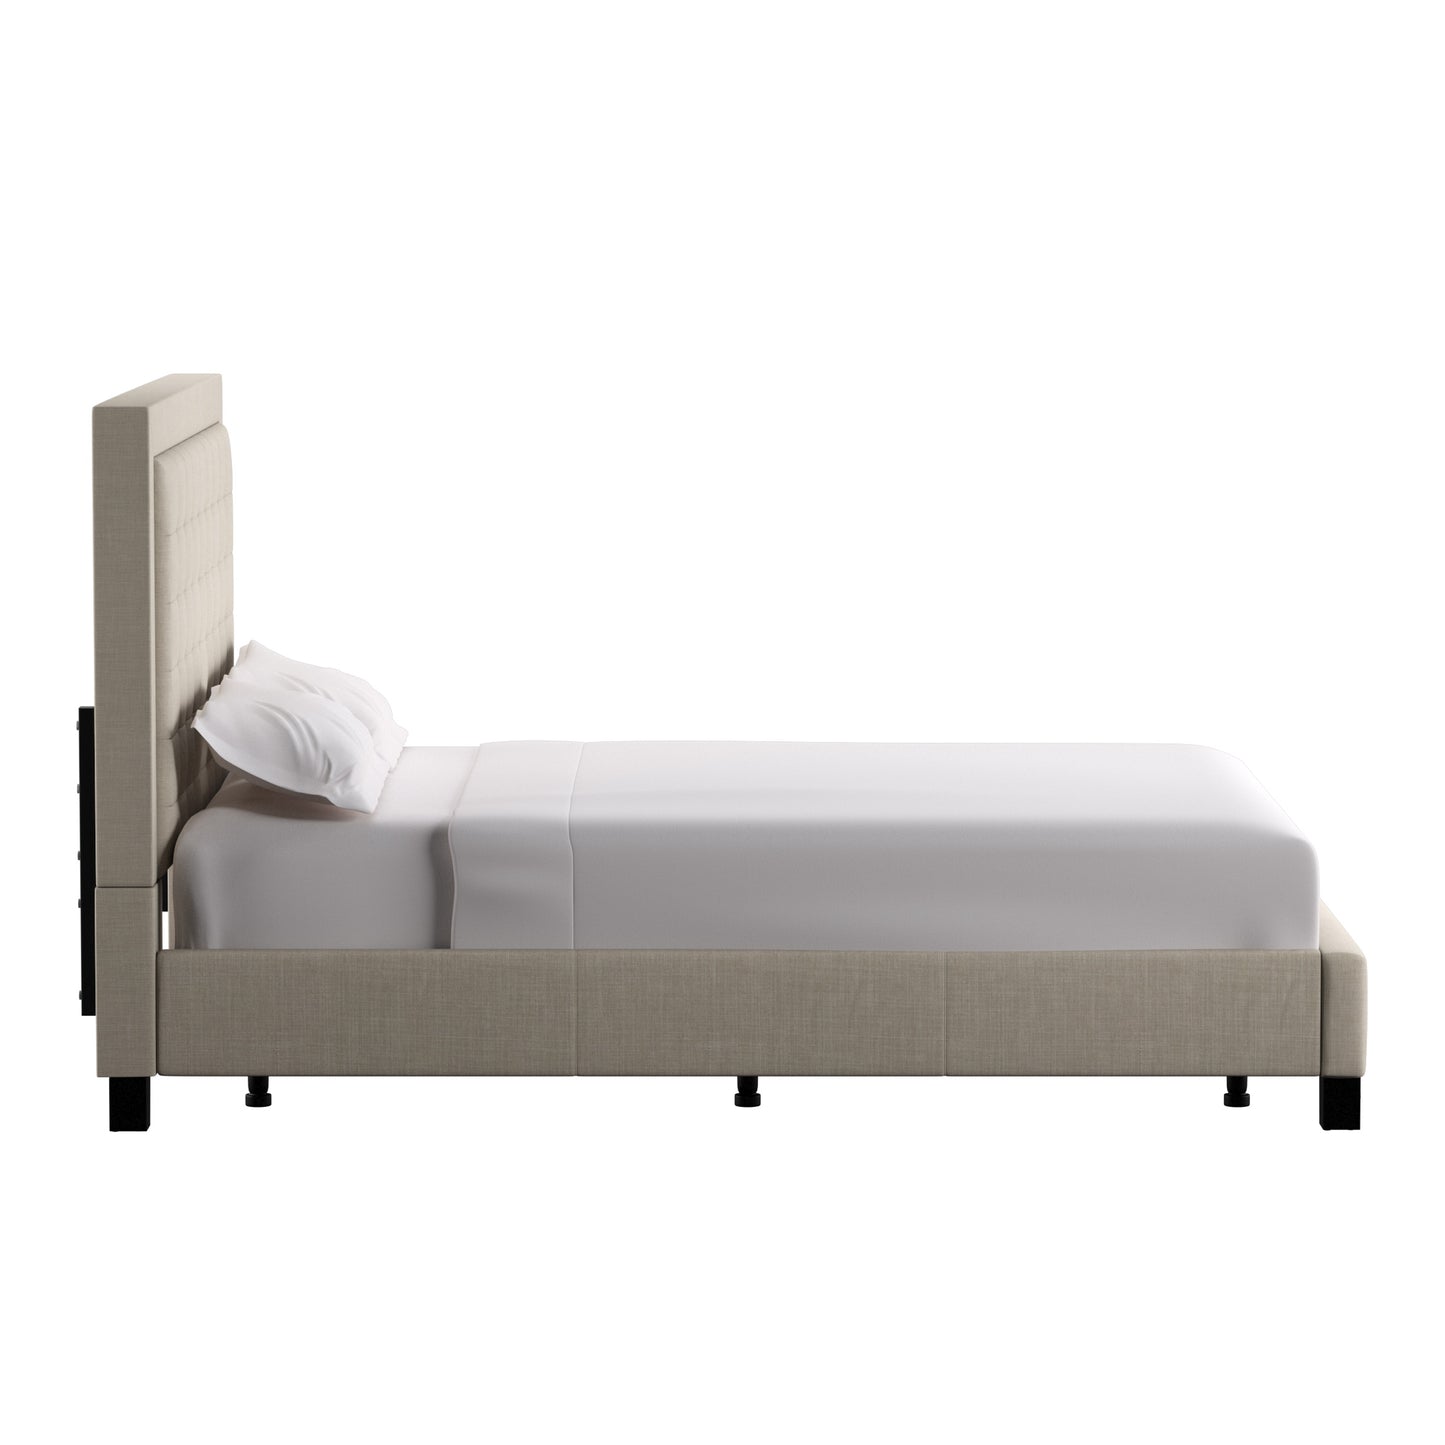 Square Button-Tufted Upholstered Bed - Beige, Queen